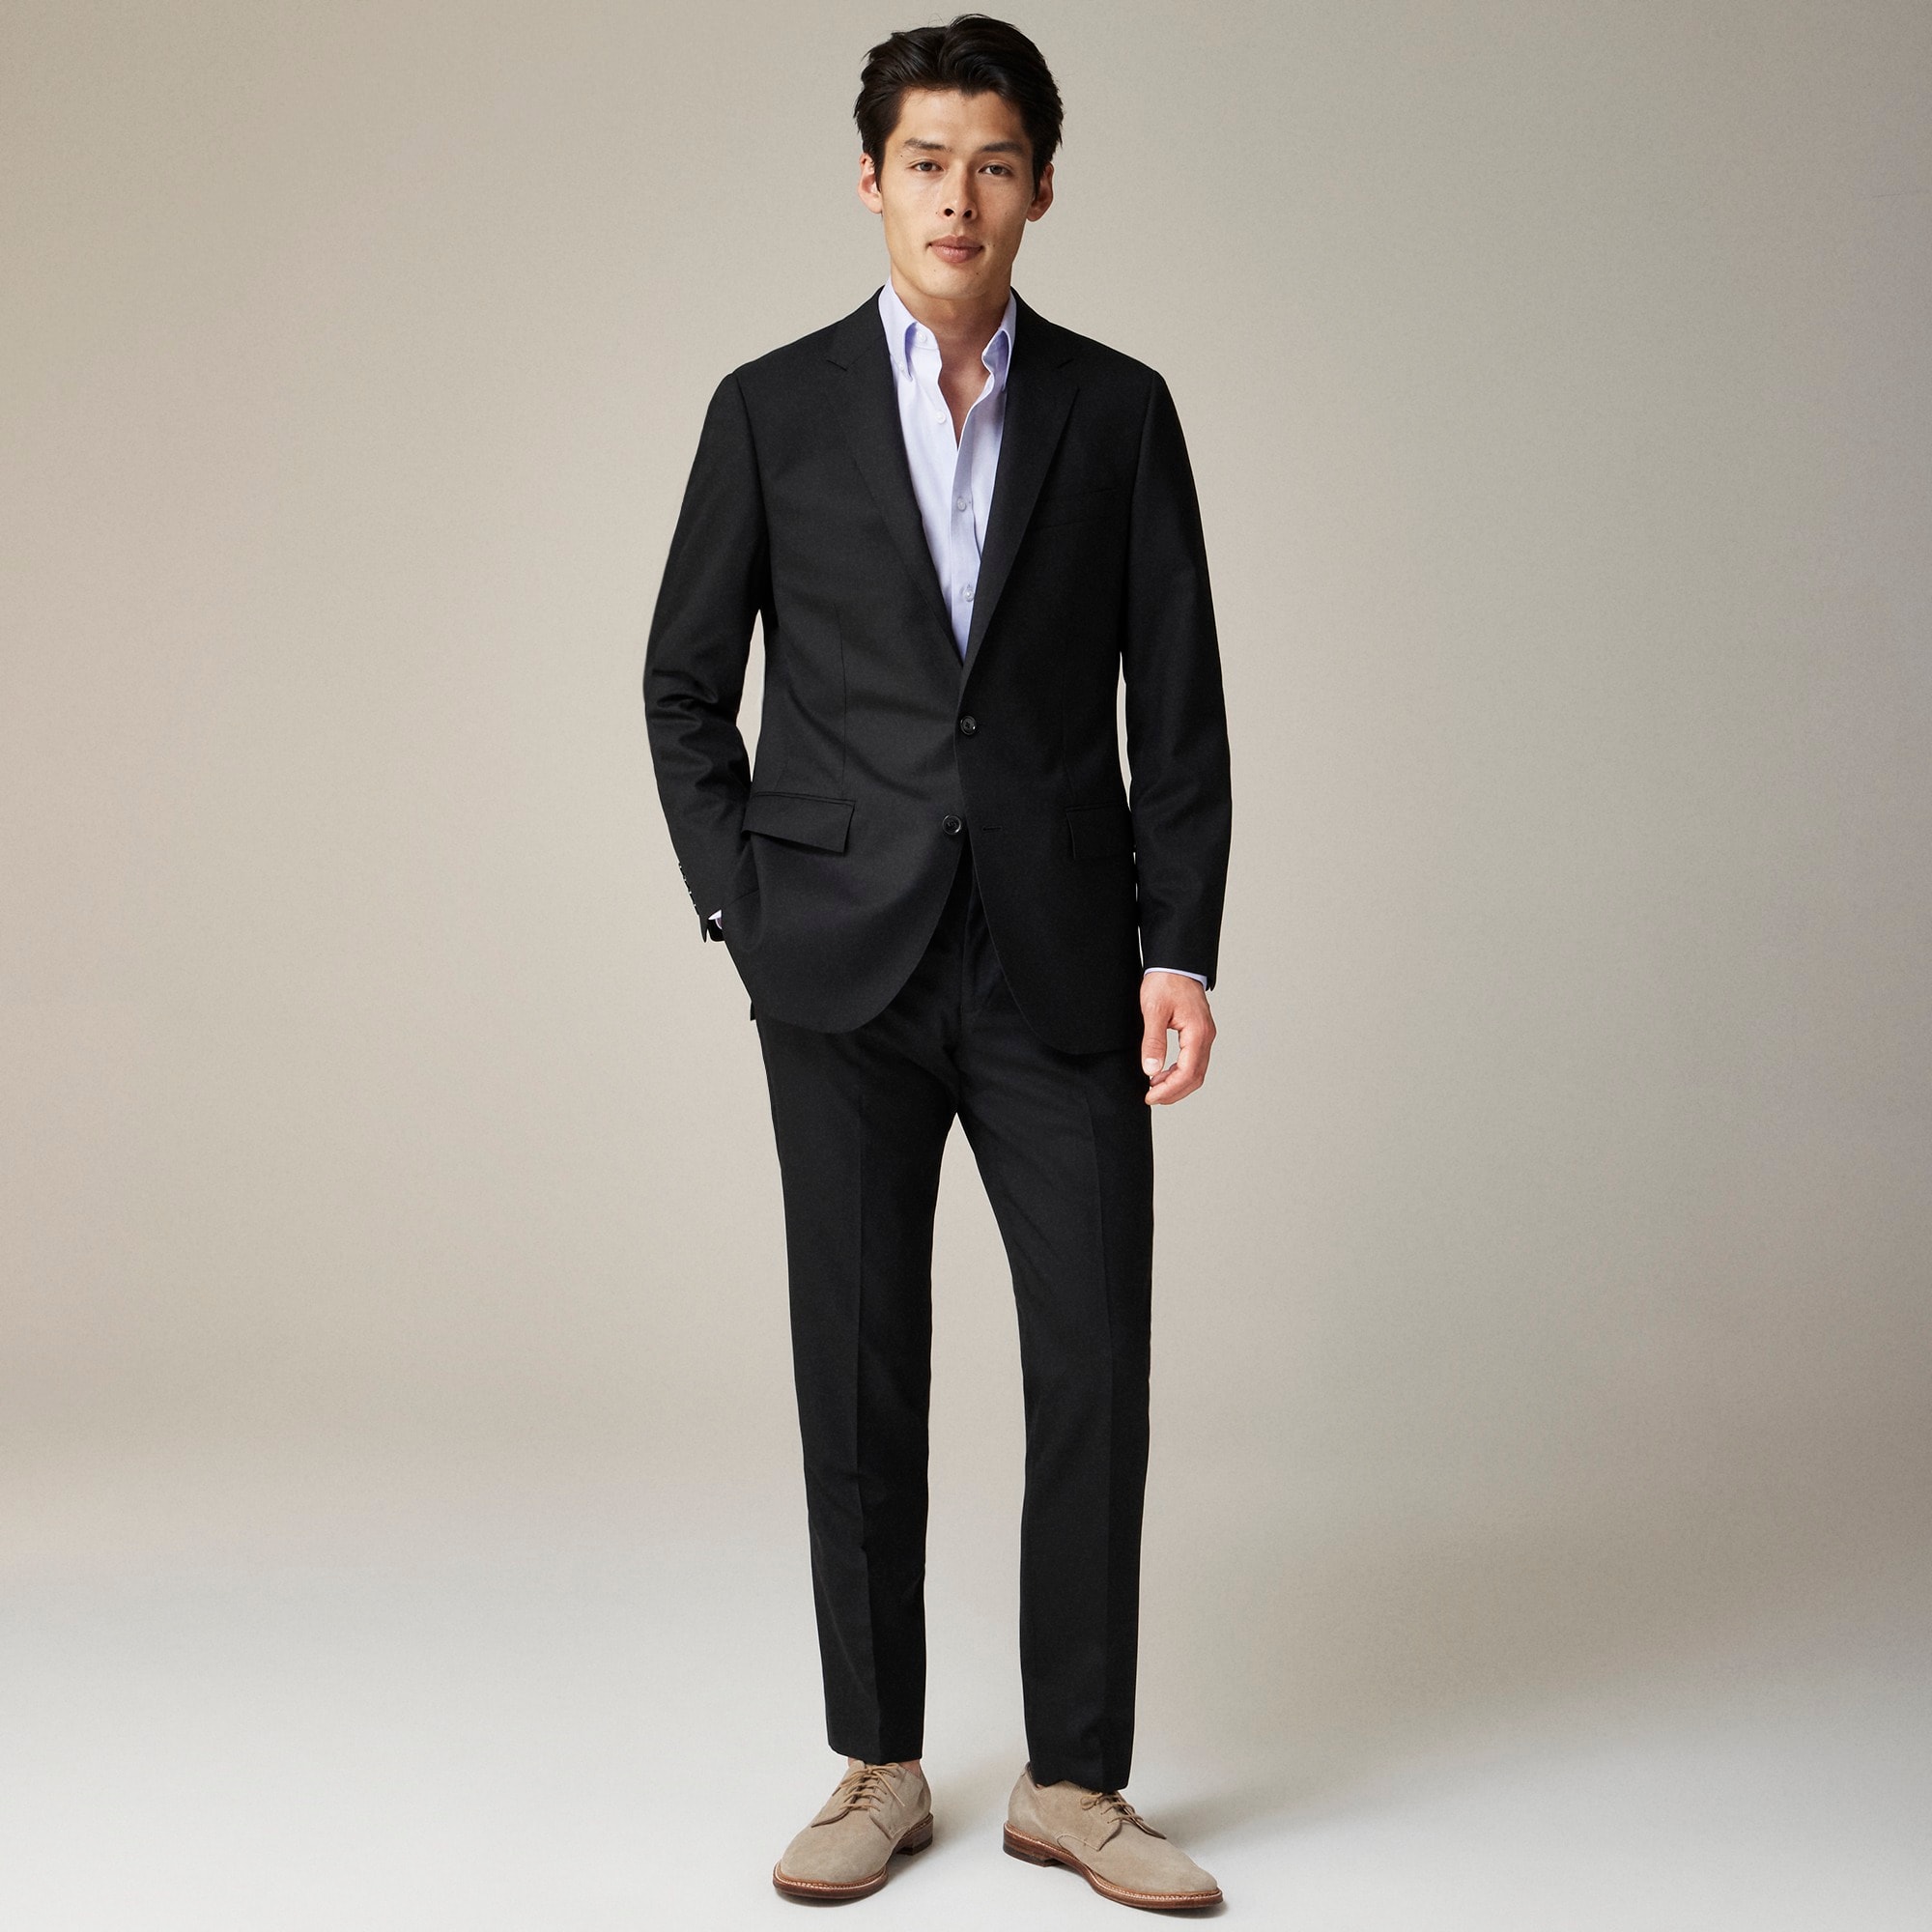  Ludlow Slim-fit suit jacket with double vent in Italian wool